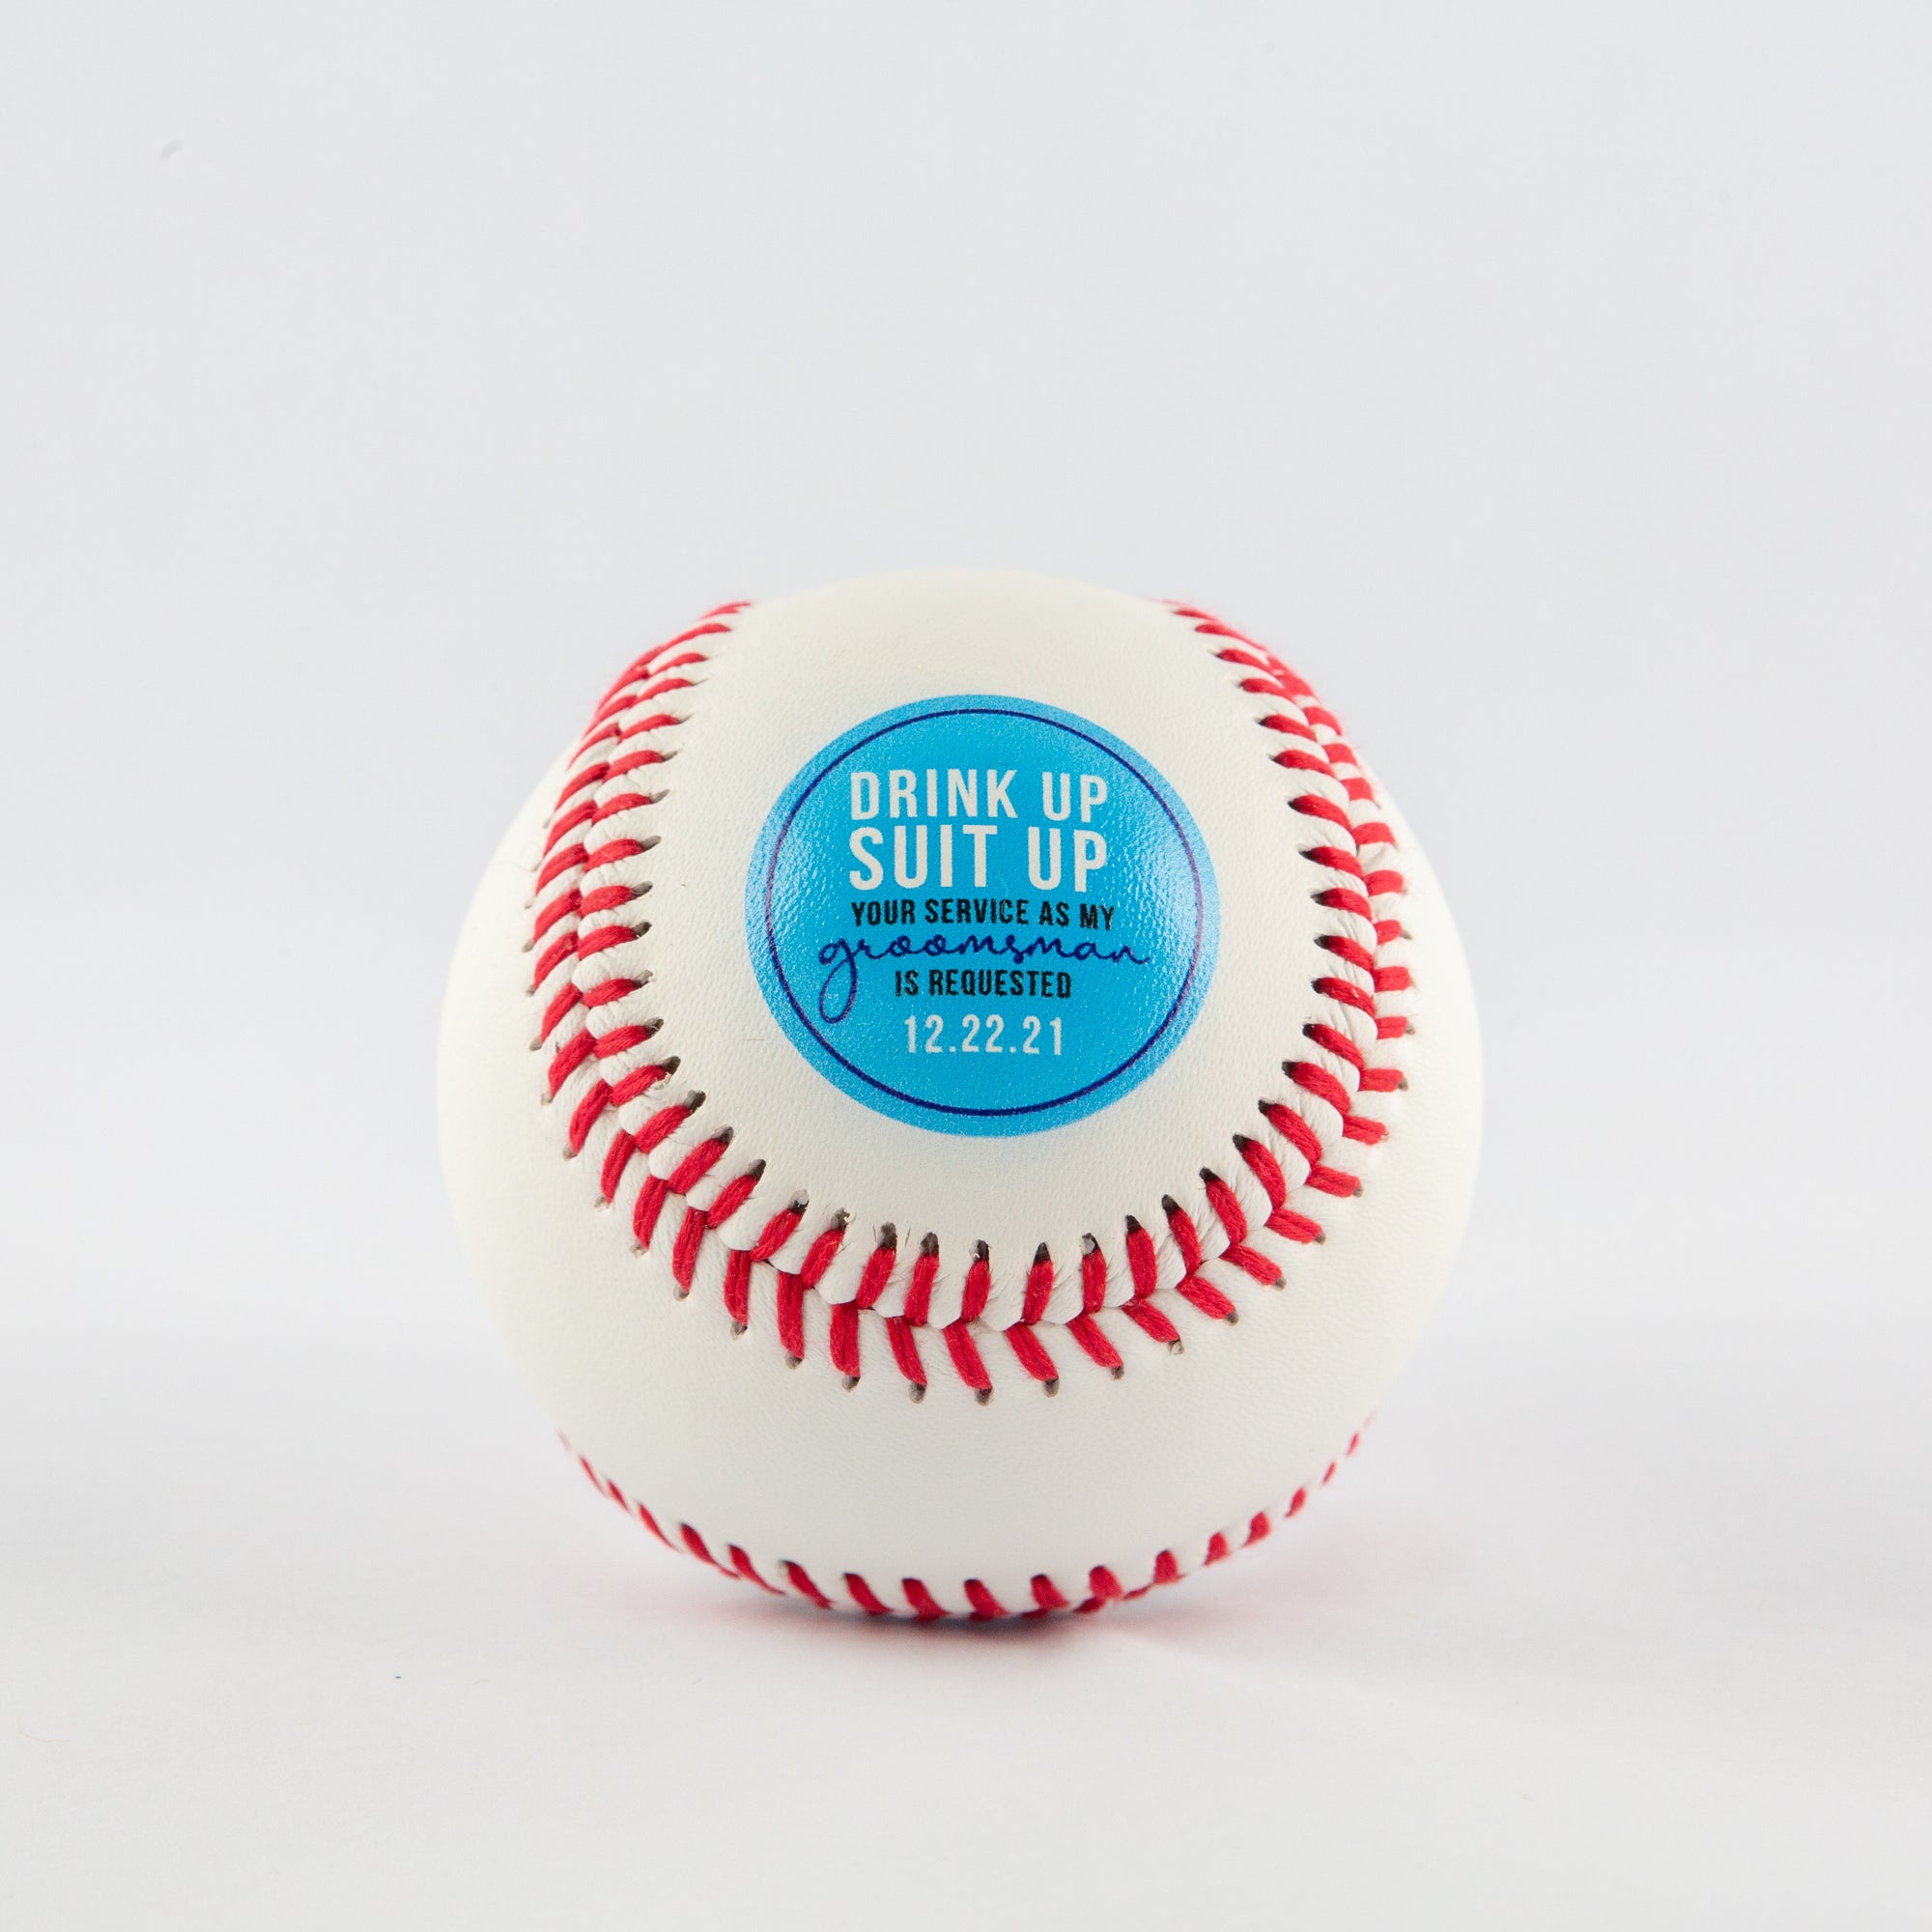 Printed Baseball with Drink Up Suit Up Design